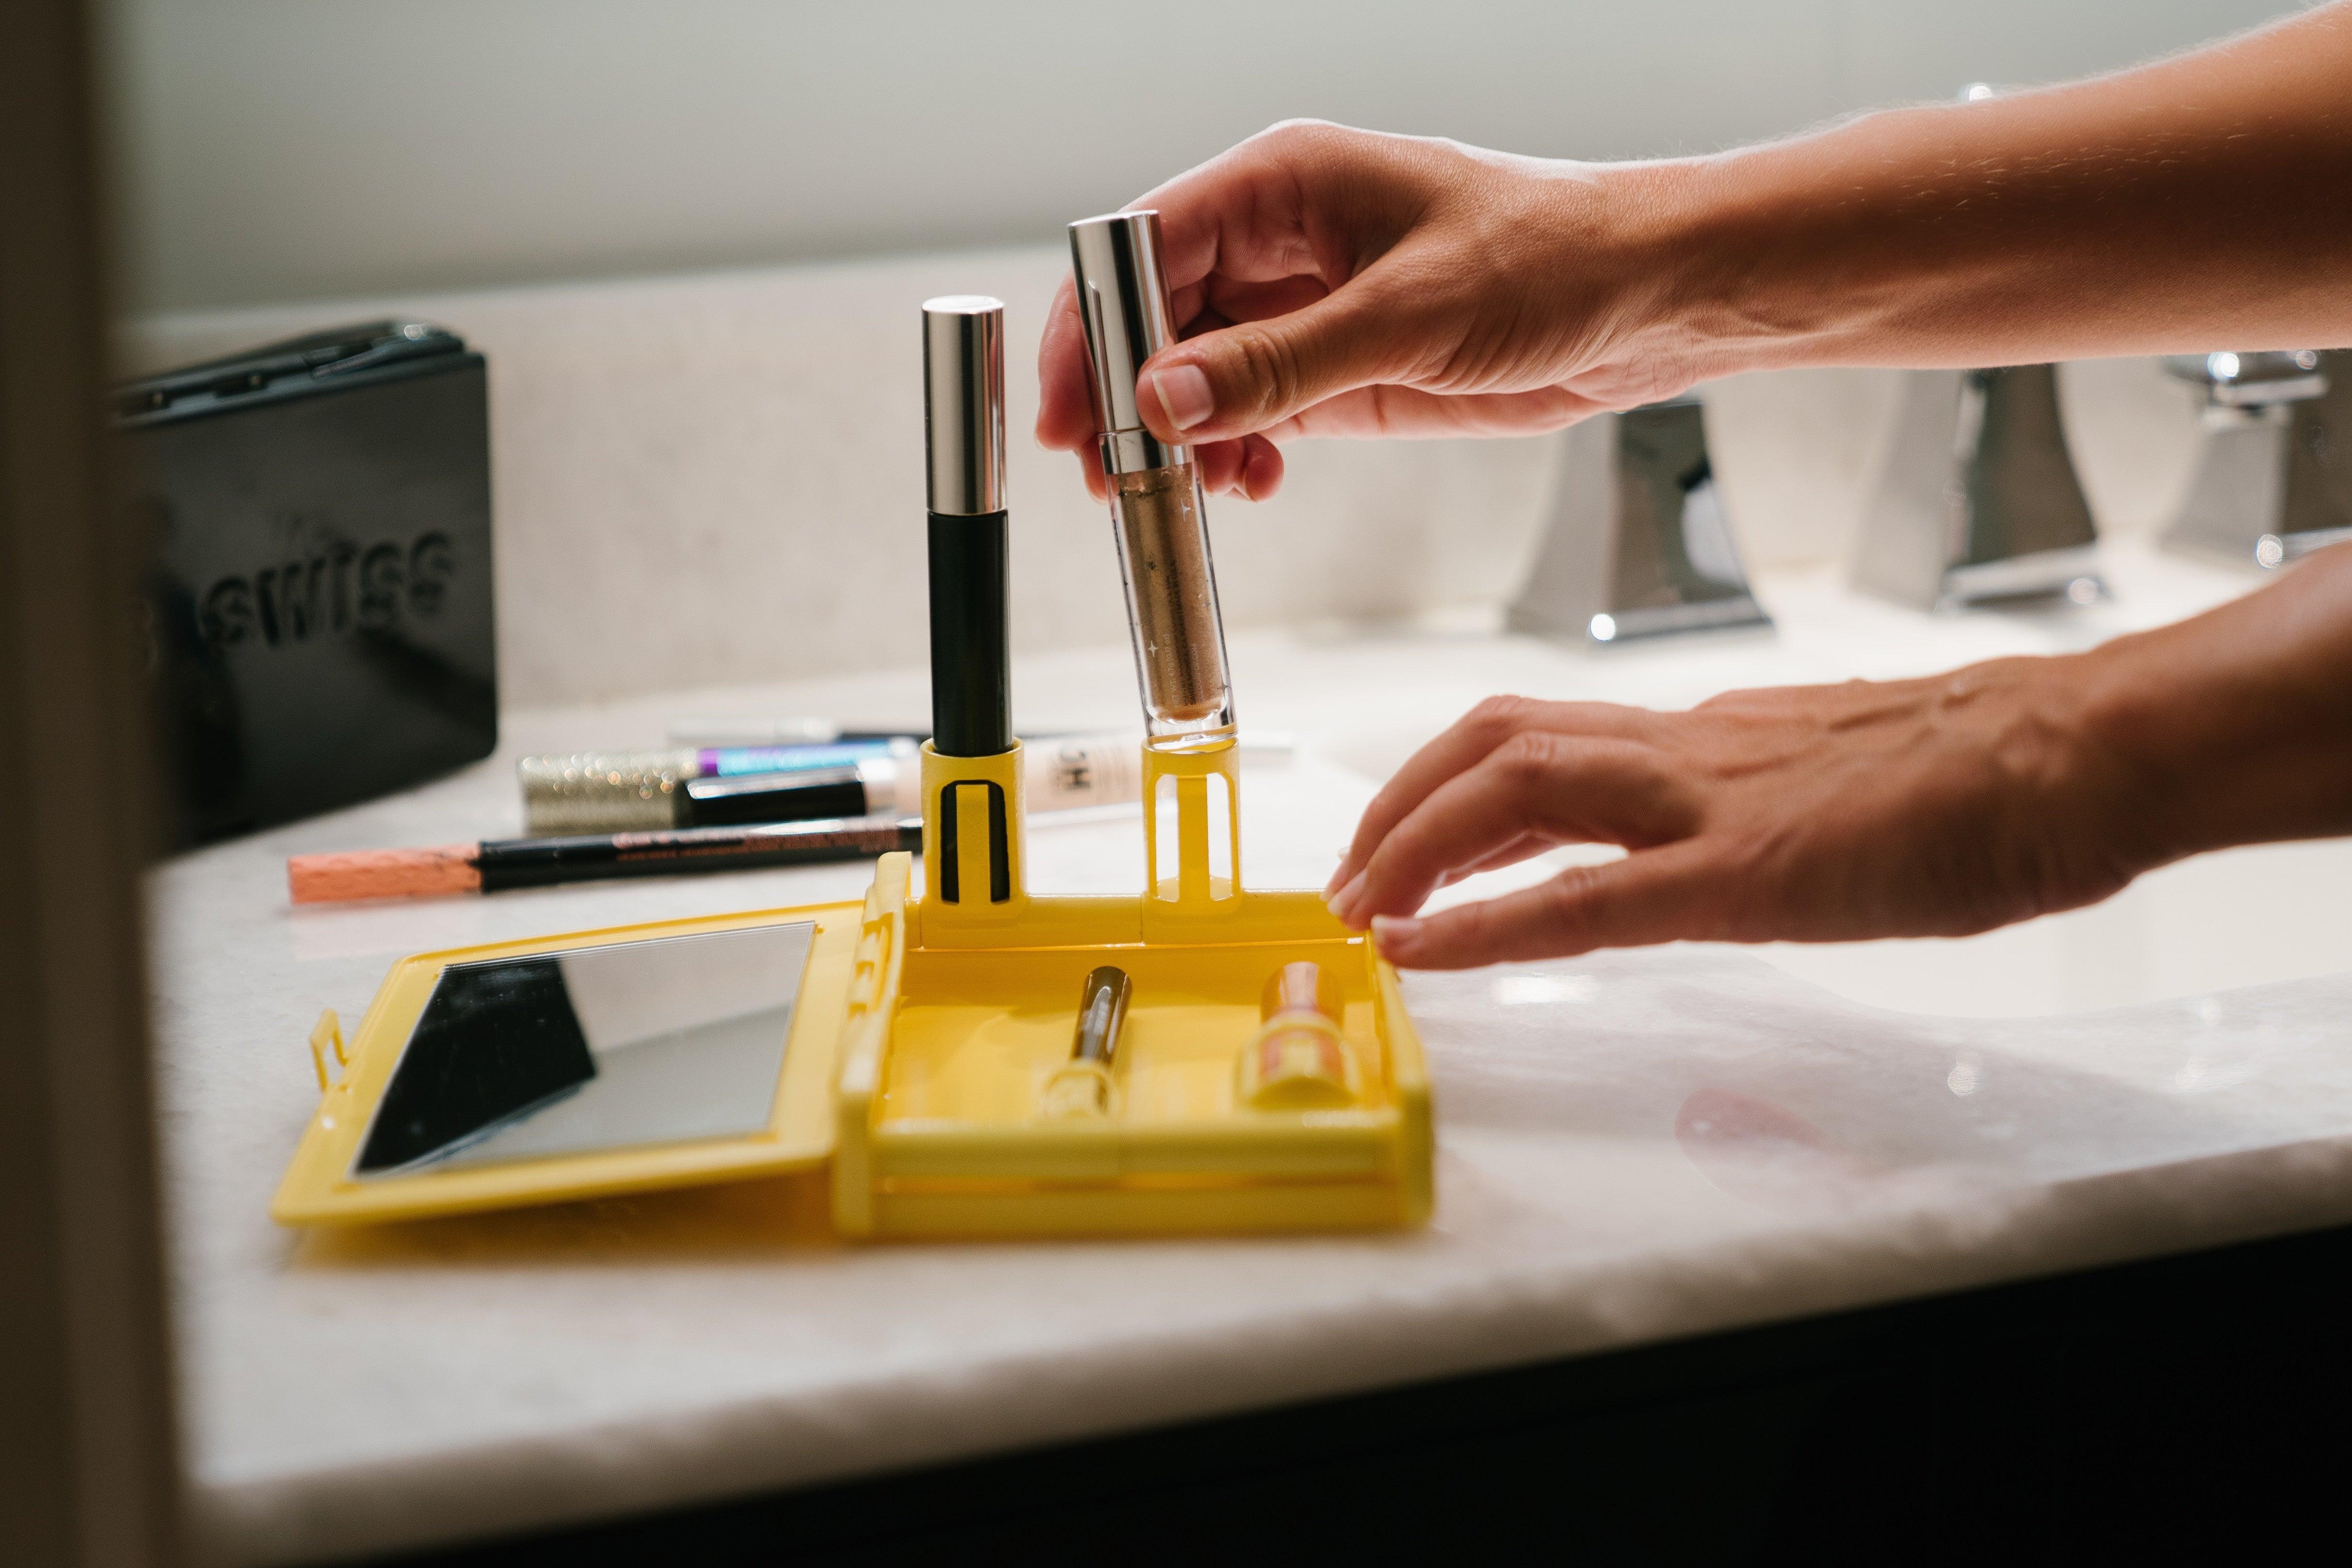 Create A Personal Beauty Station: The Joy Of Customizing Your New Vanity - Bathroom Design Center